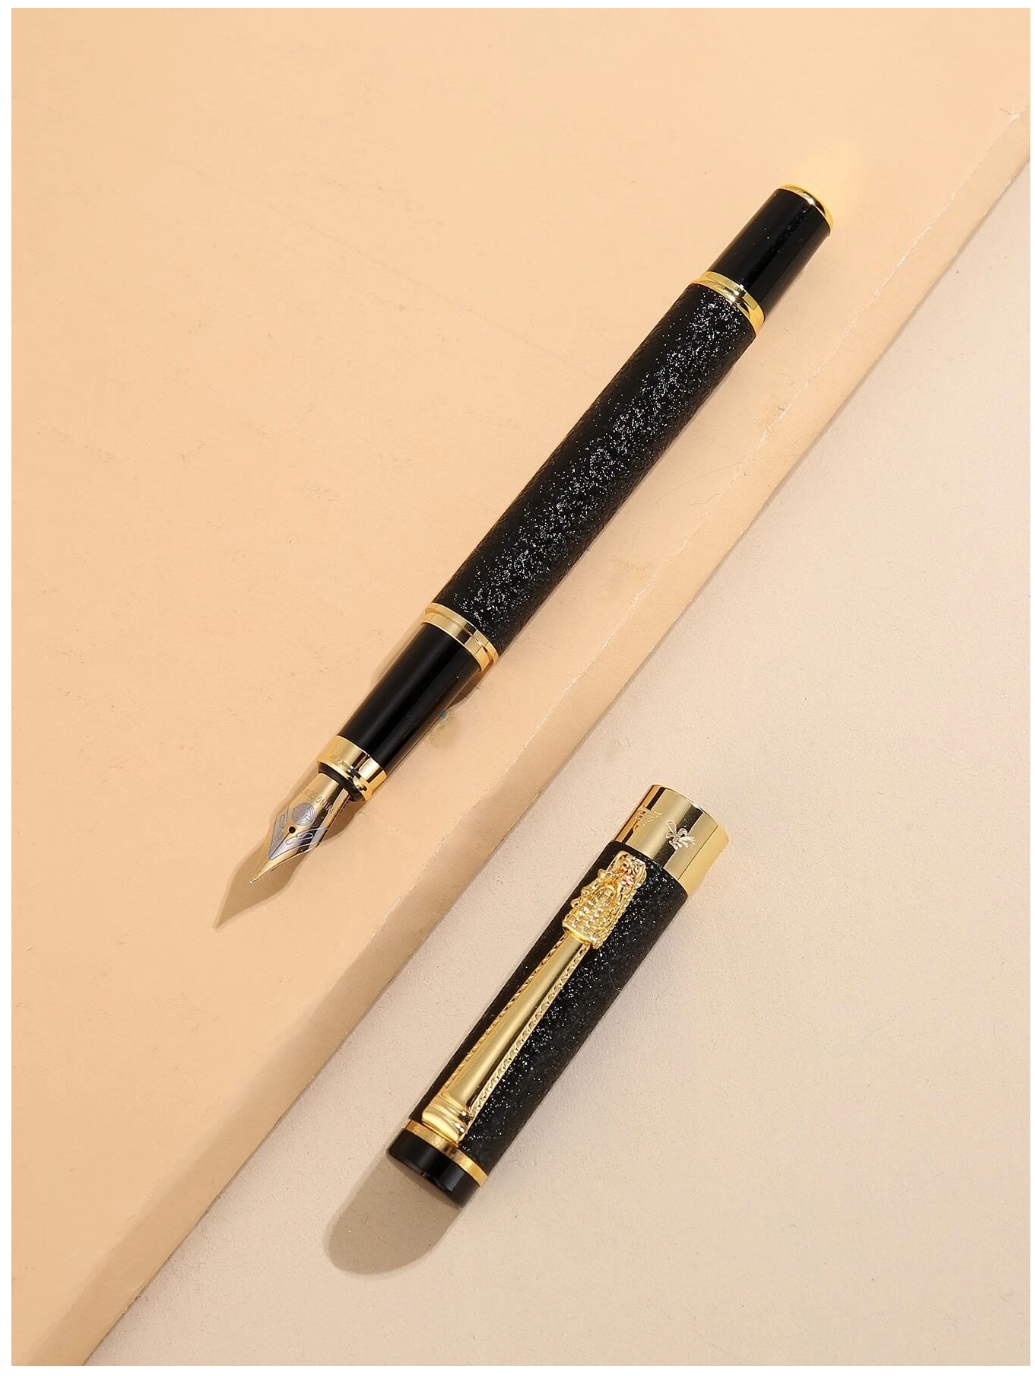 Gleam and Flow: Embrace Elegance with Our Singular Metallic Fountain Pen!